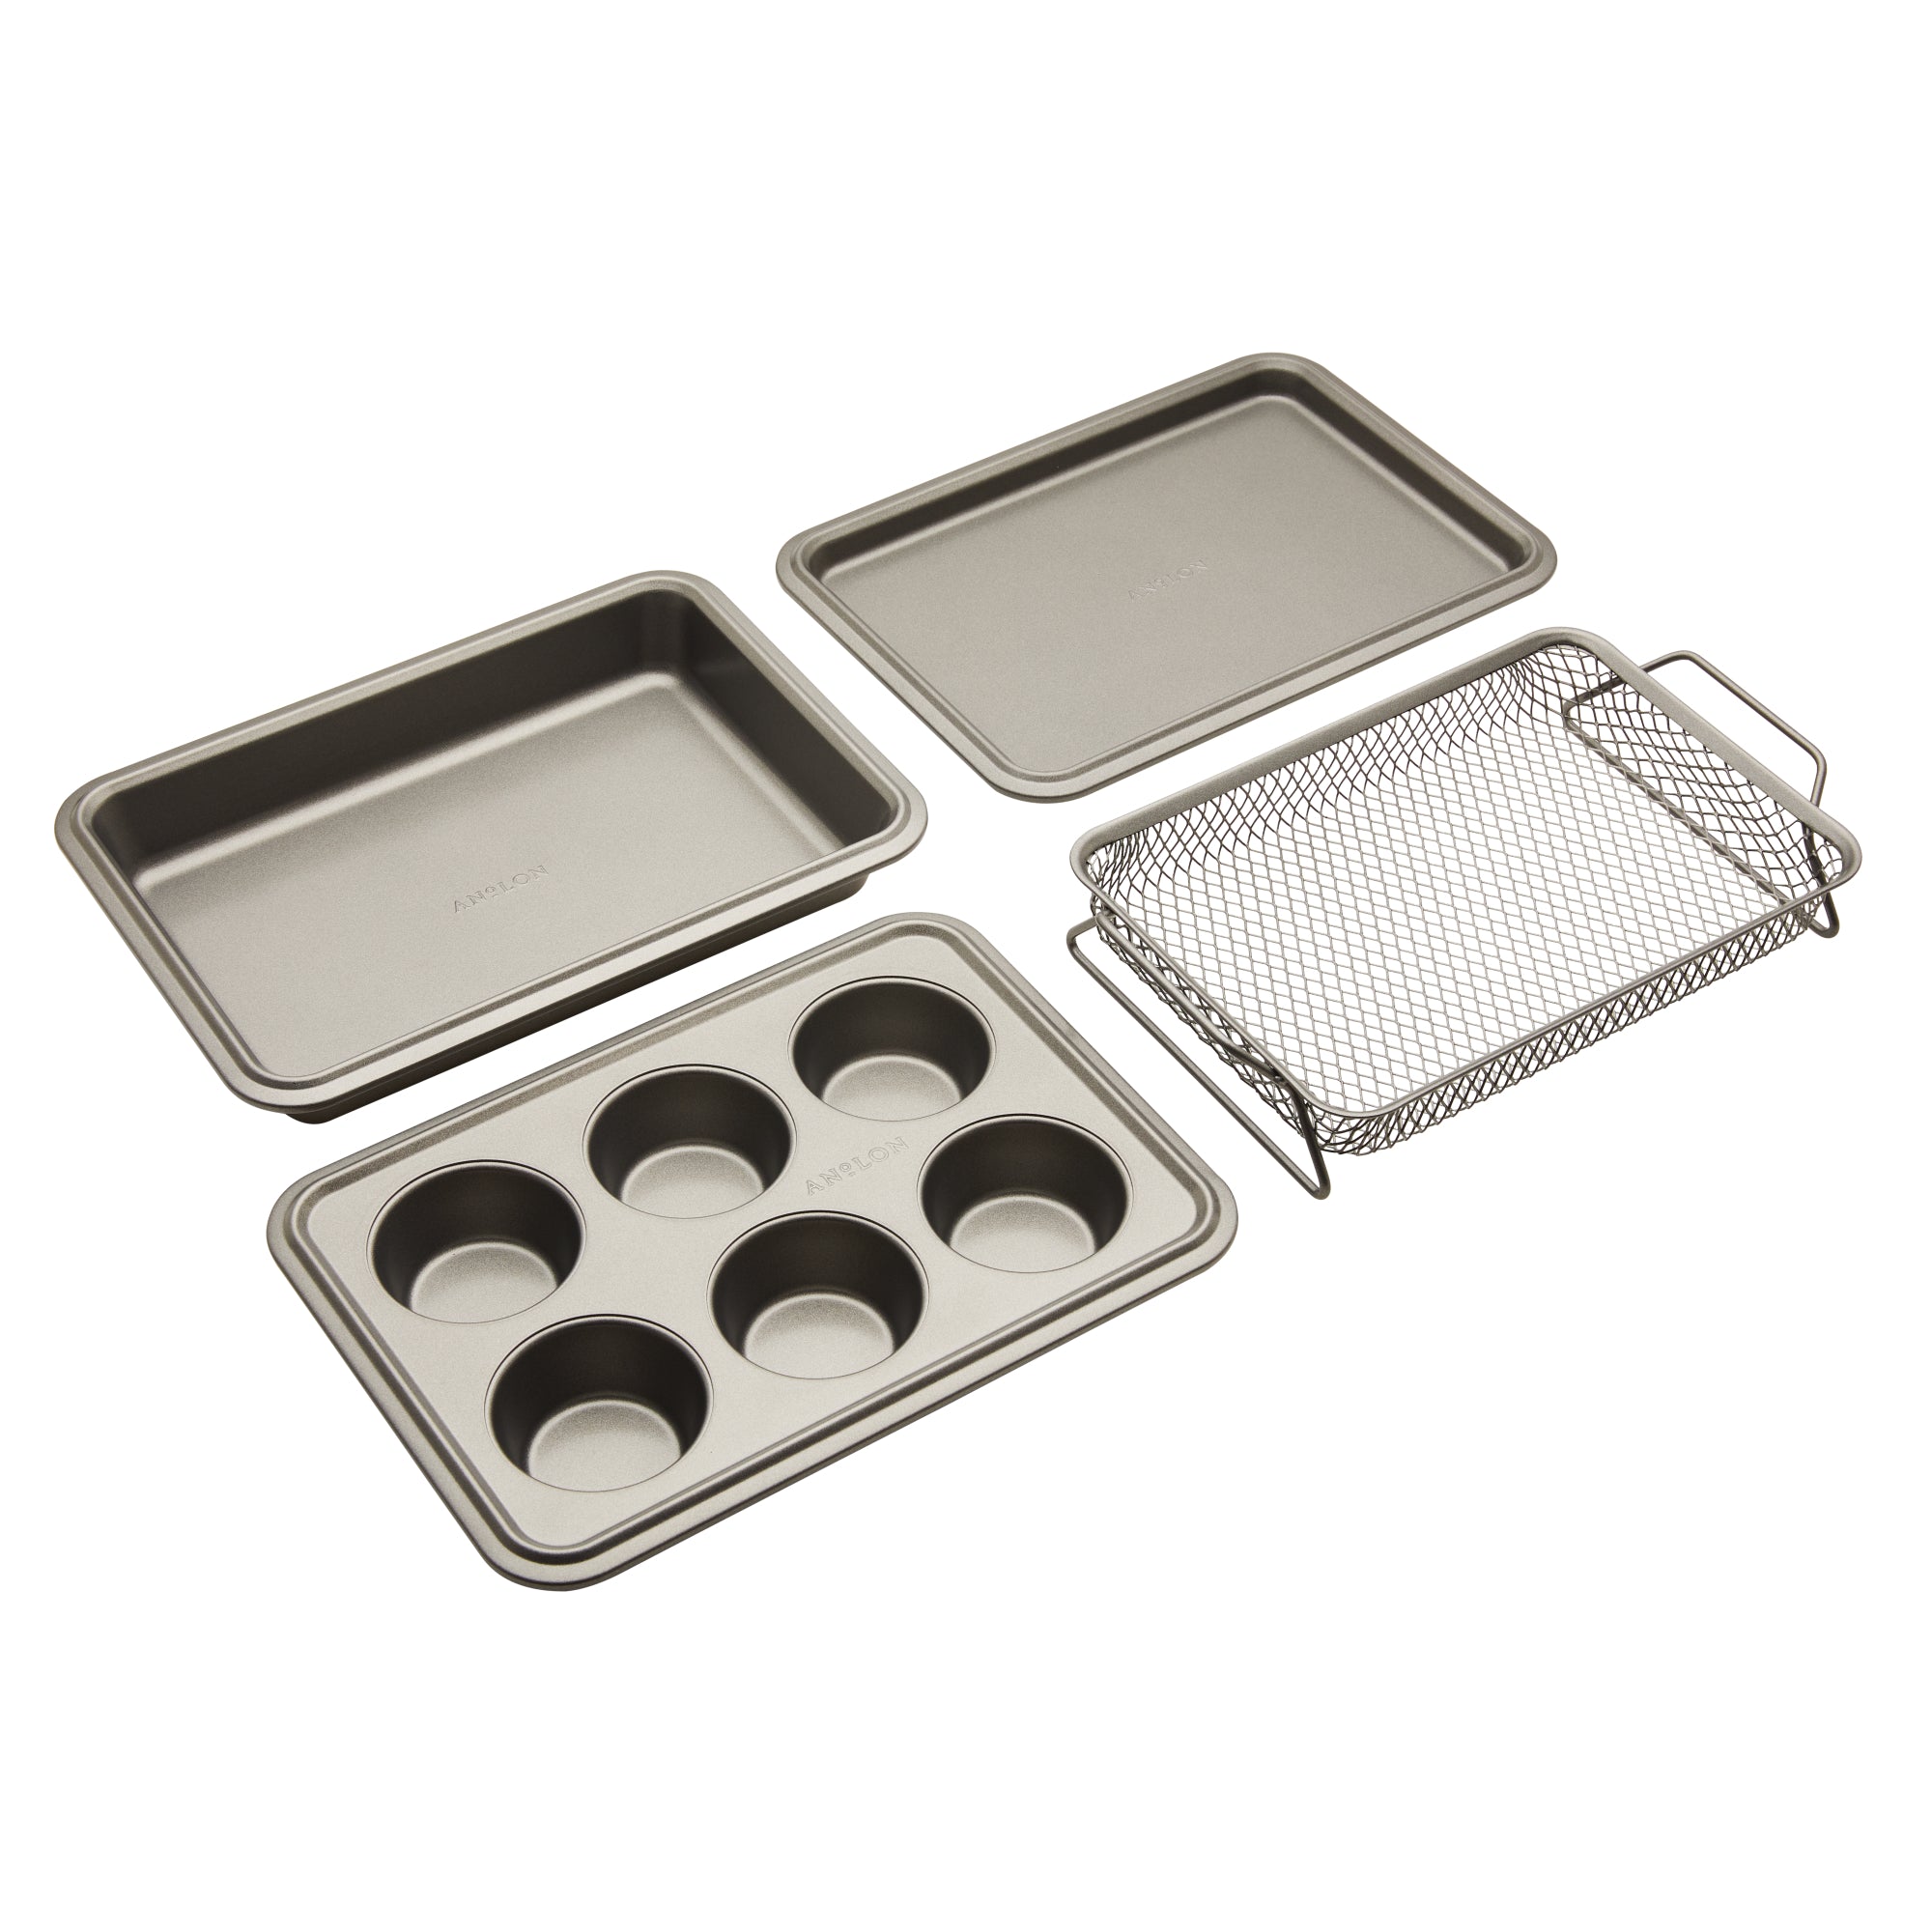 Toaster Pans Oven Tray Stainless Steel Small Baking Cookie Pan